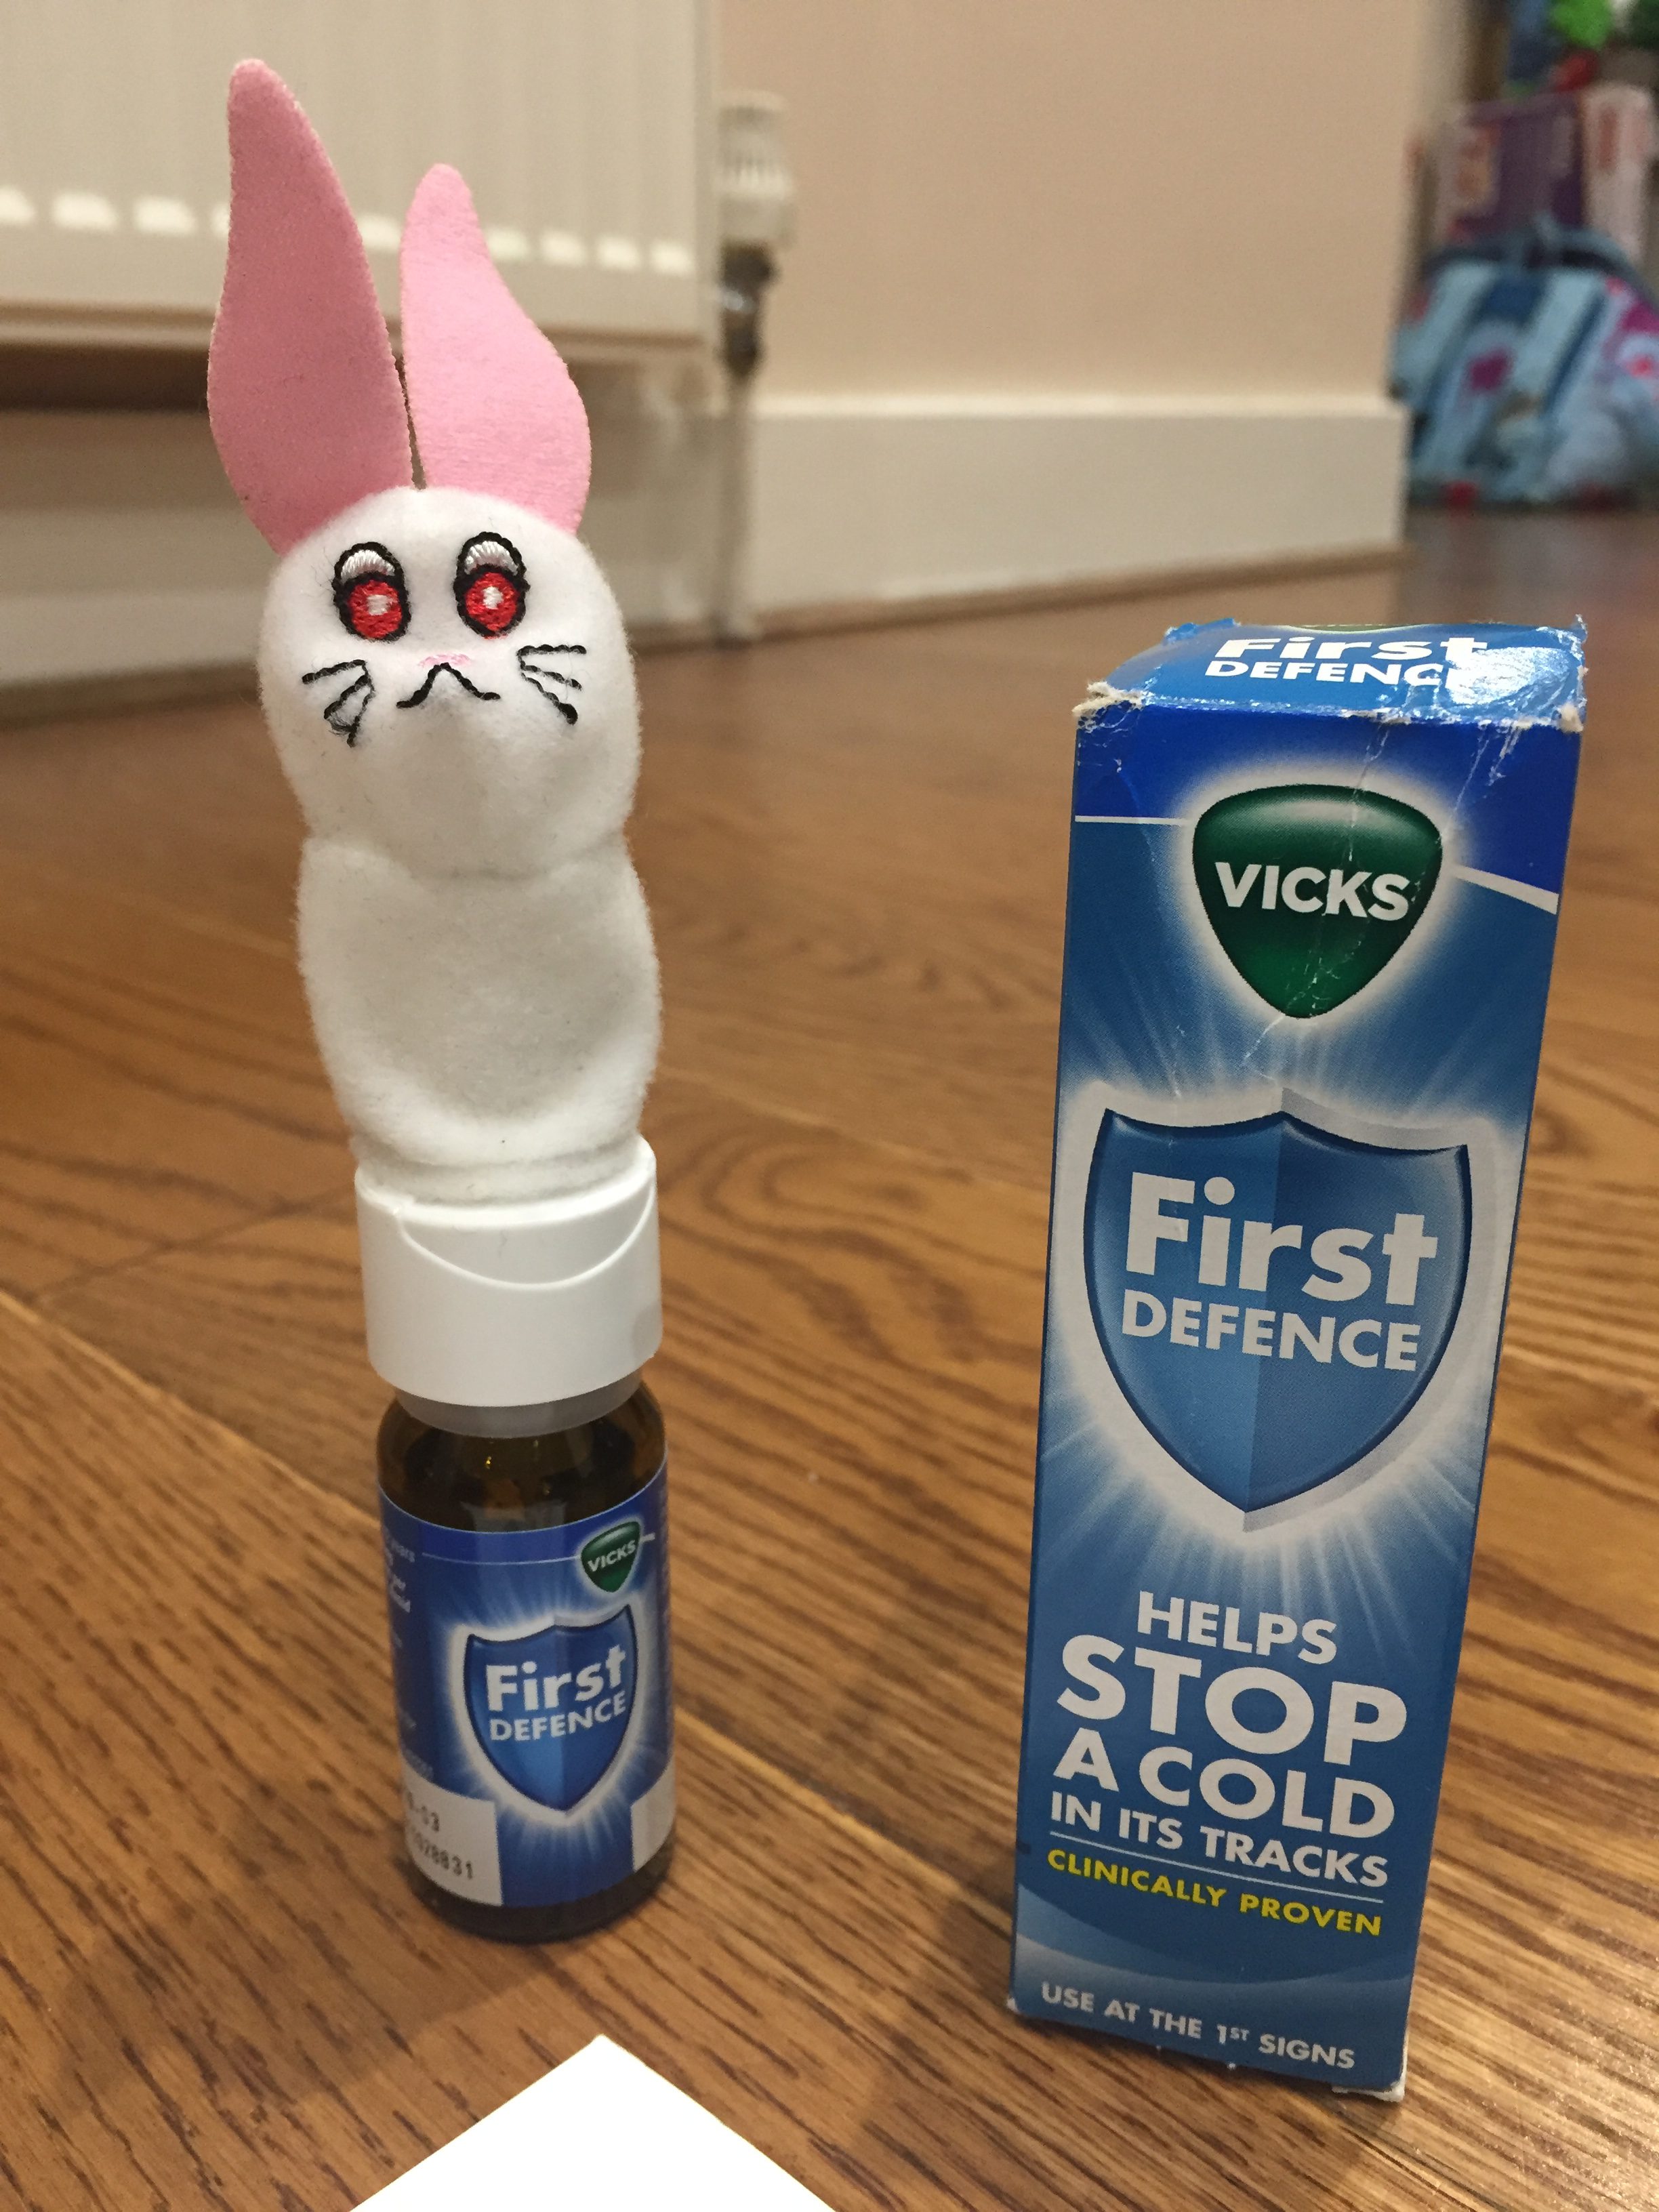 Tricks to make your sick children feel better … and so you! #VicksTricks